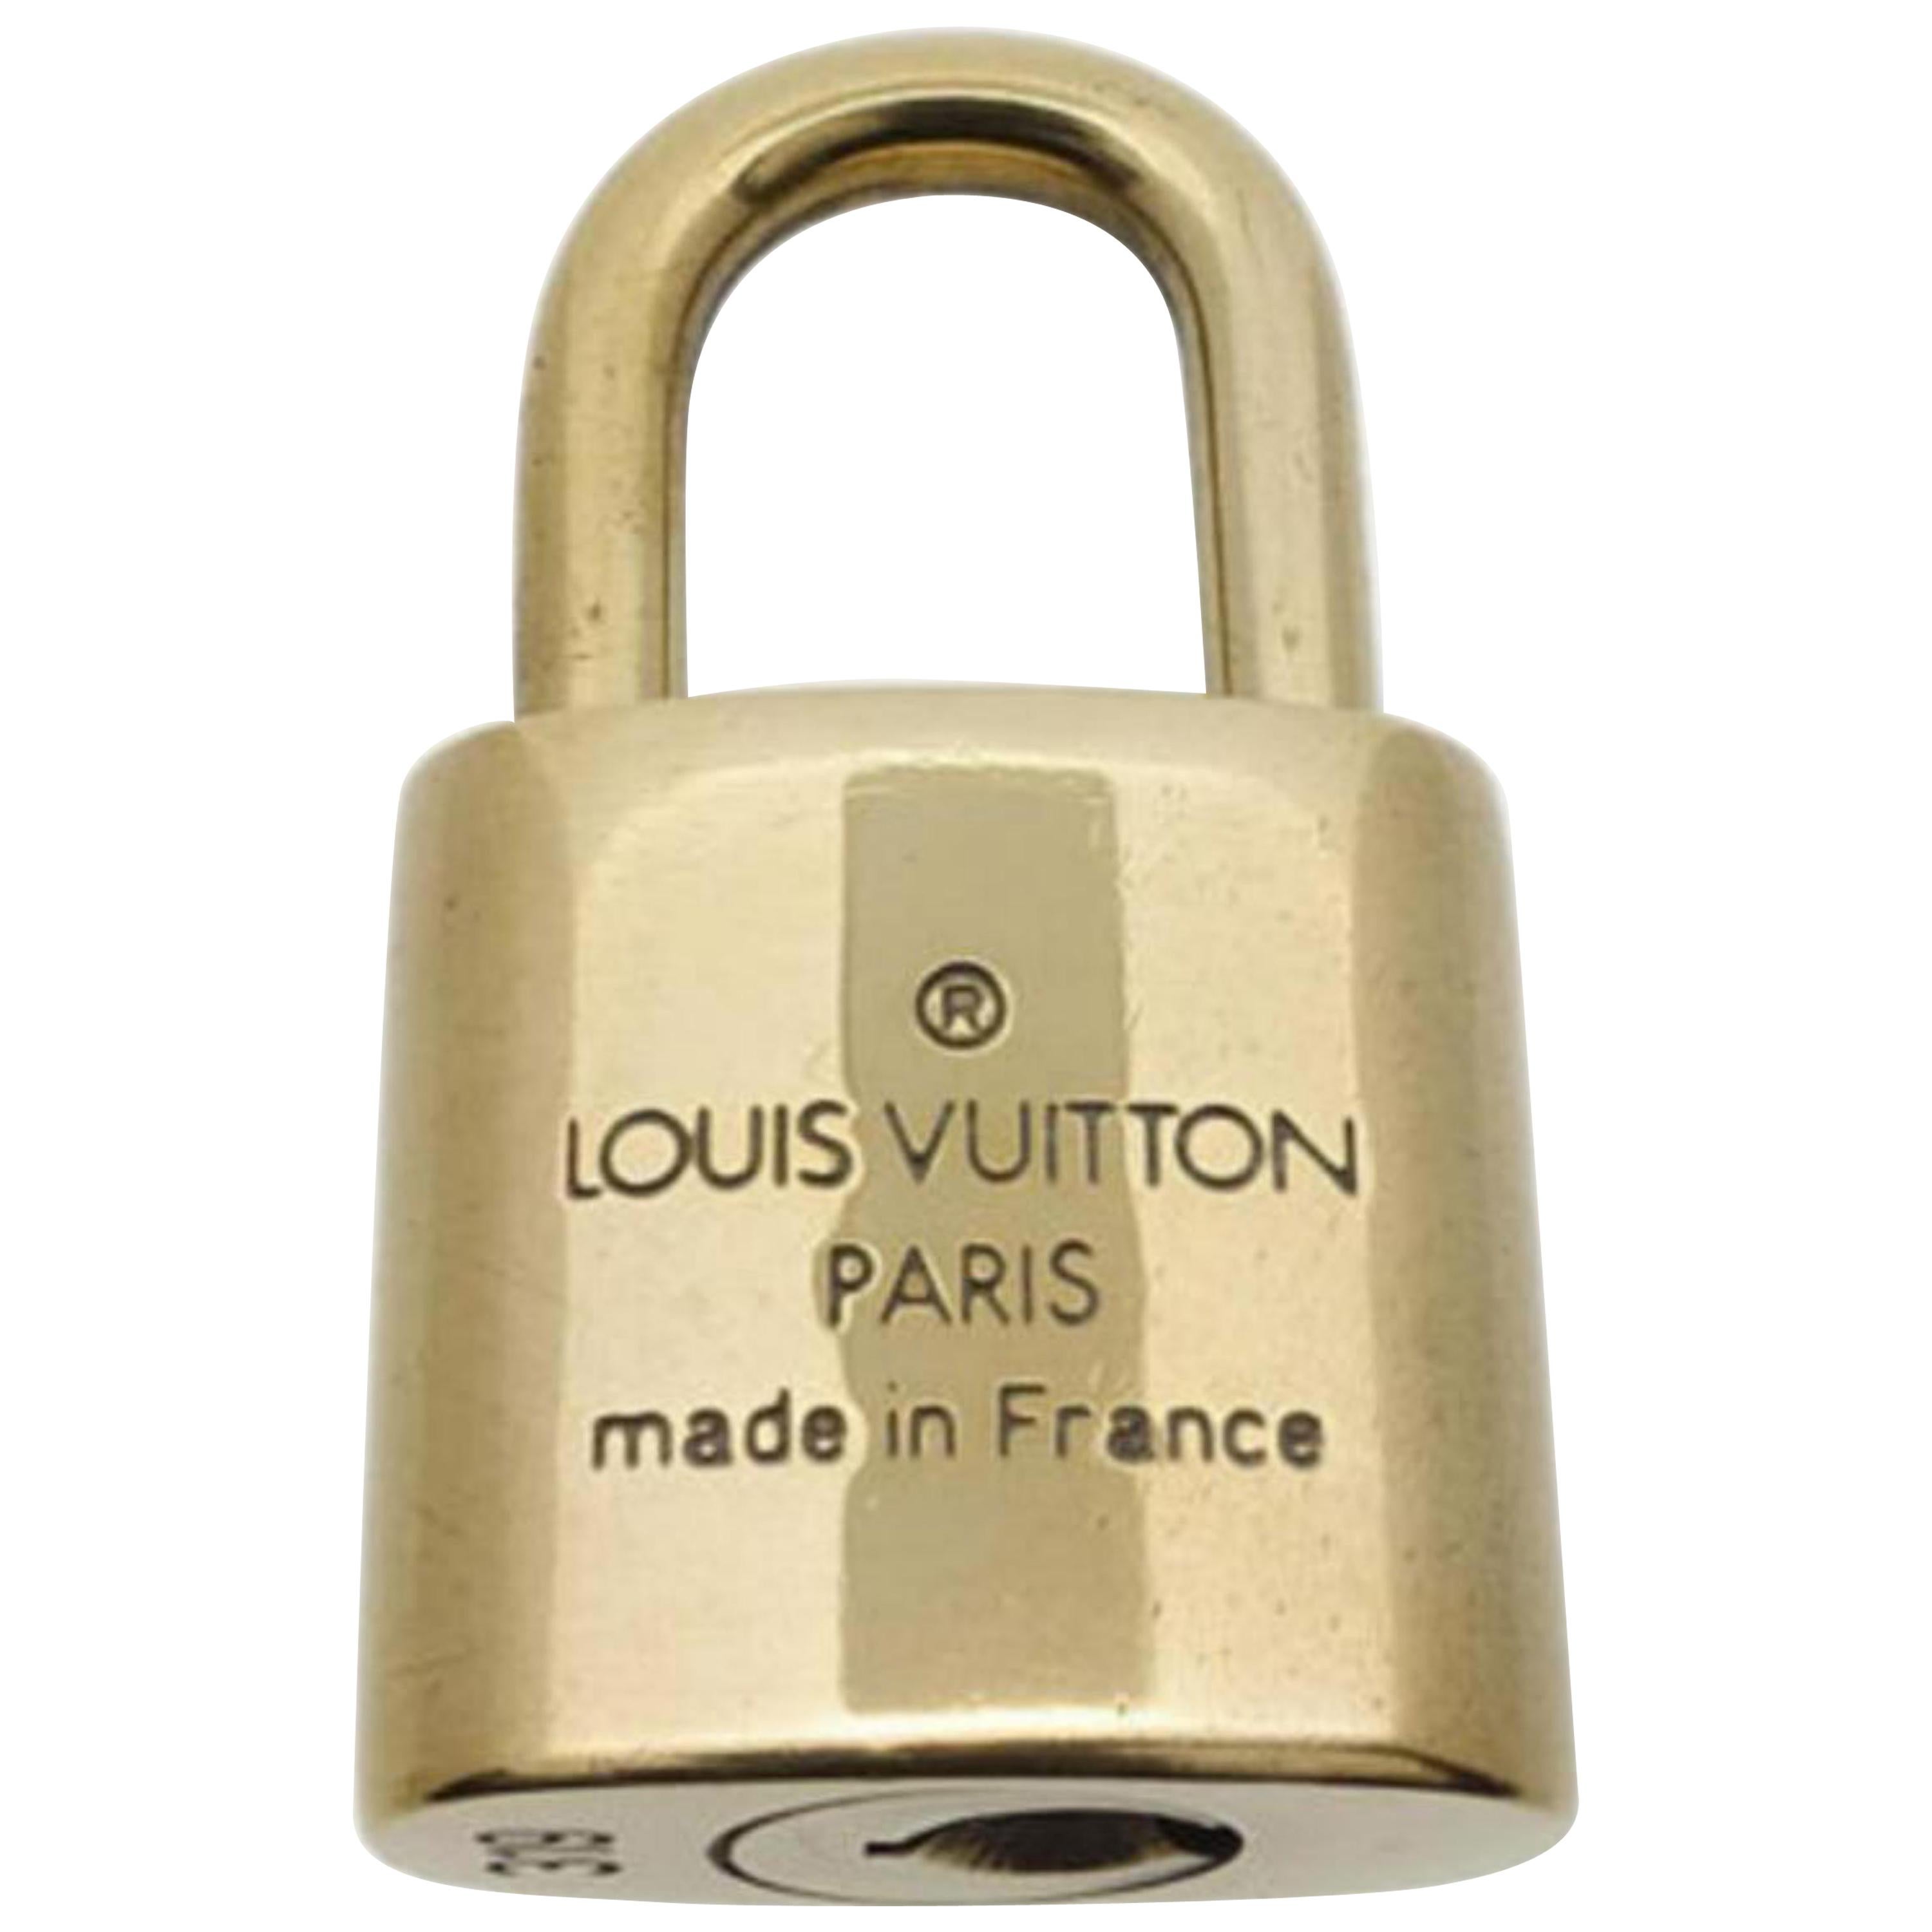 Louis Vuitton Gold Single Key Lock Pad Lock and Key 867698 For Sale